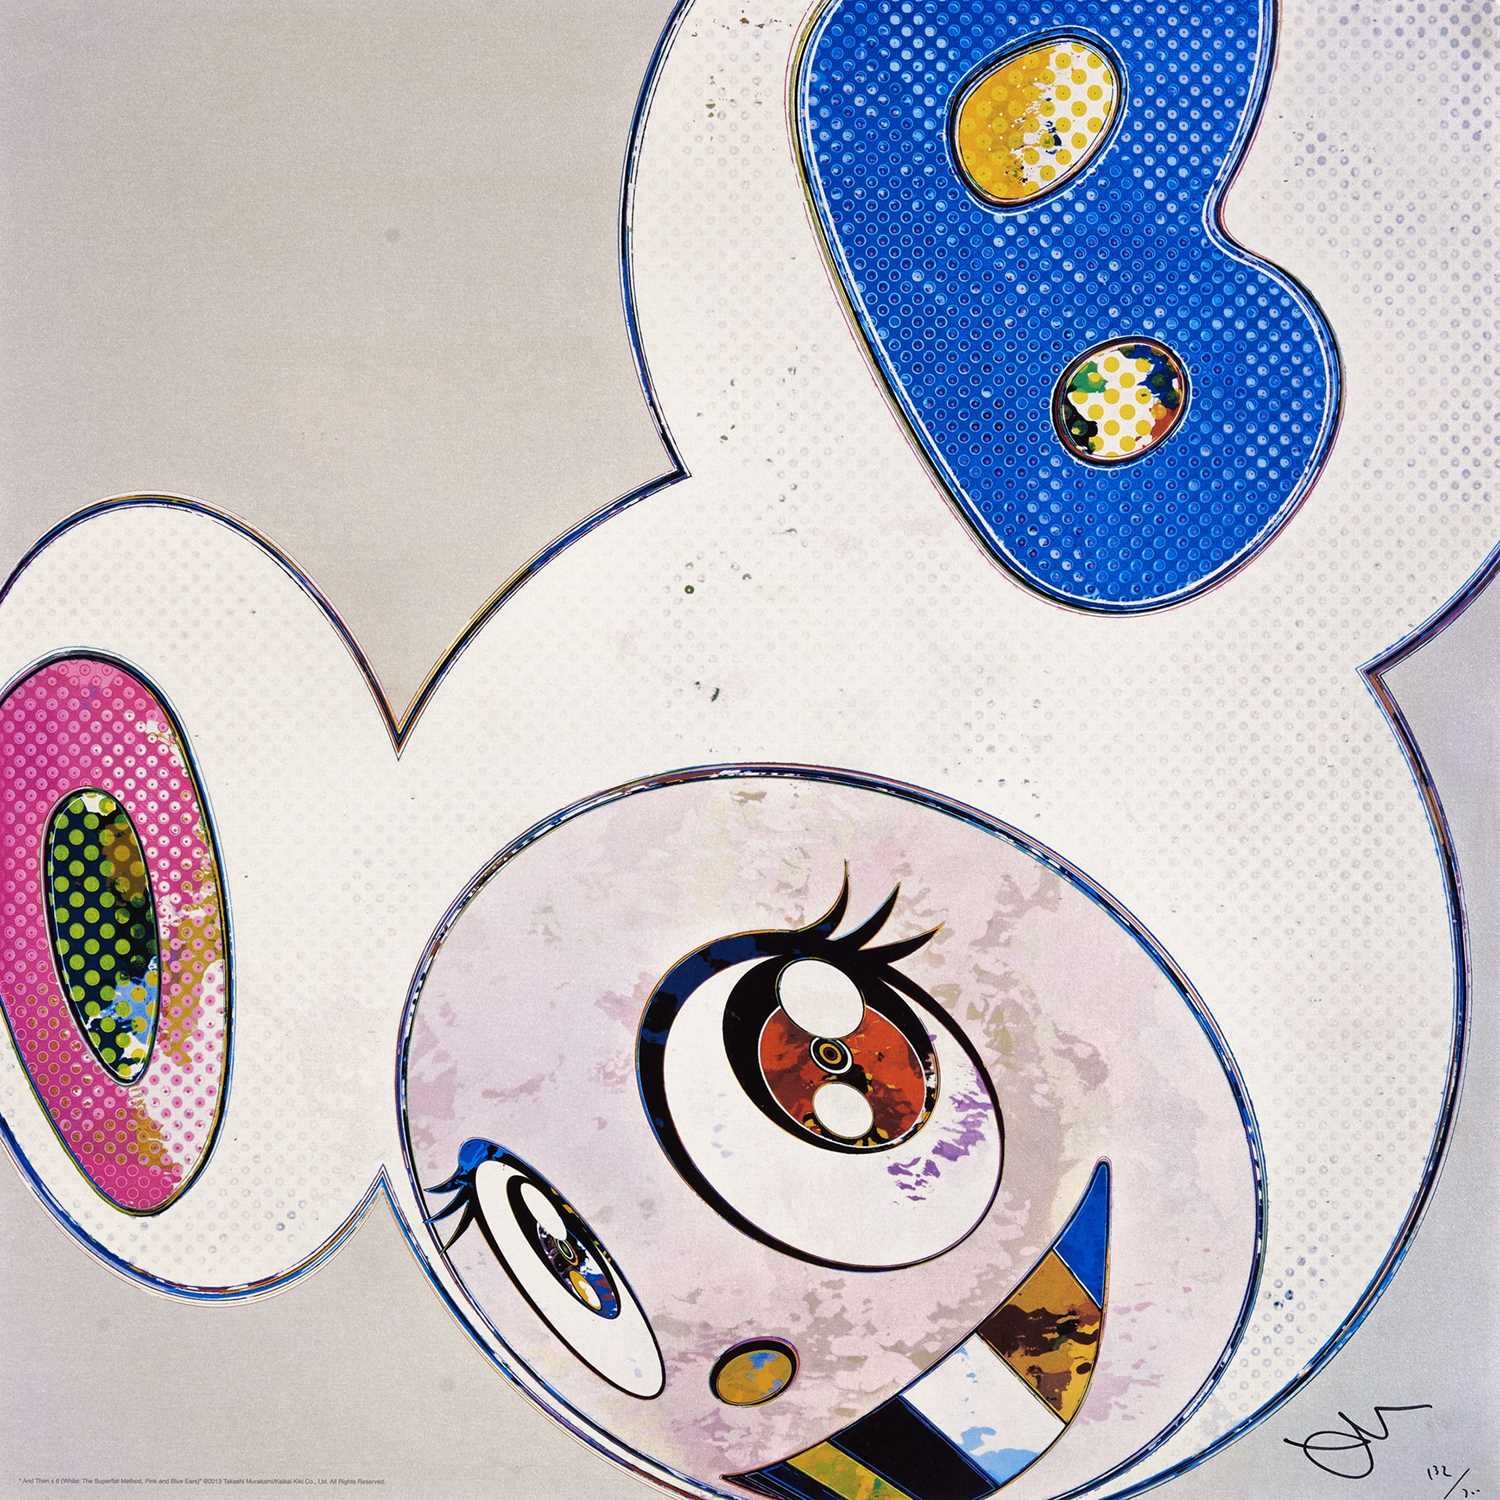 Lot 130 - Takashi Murakami (Japanese 1962-), 'And Then x 6 (White: The Superflat Method, Pink and Blue Ears)', 2013